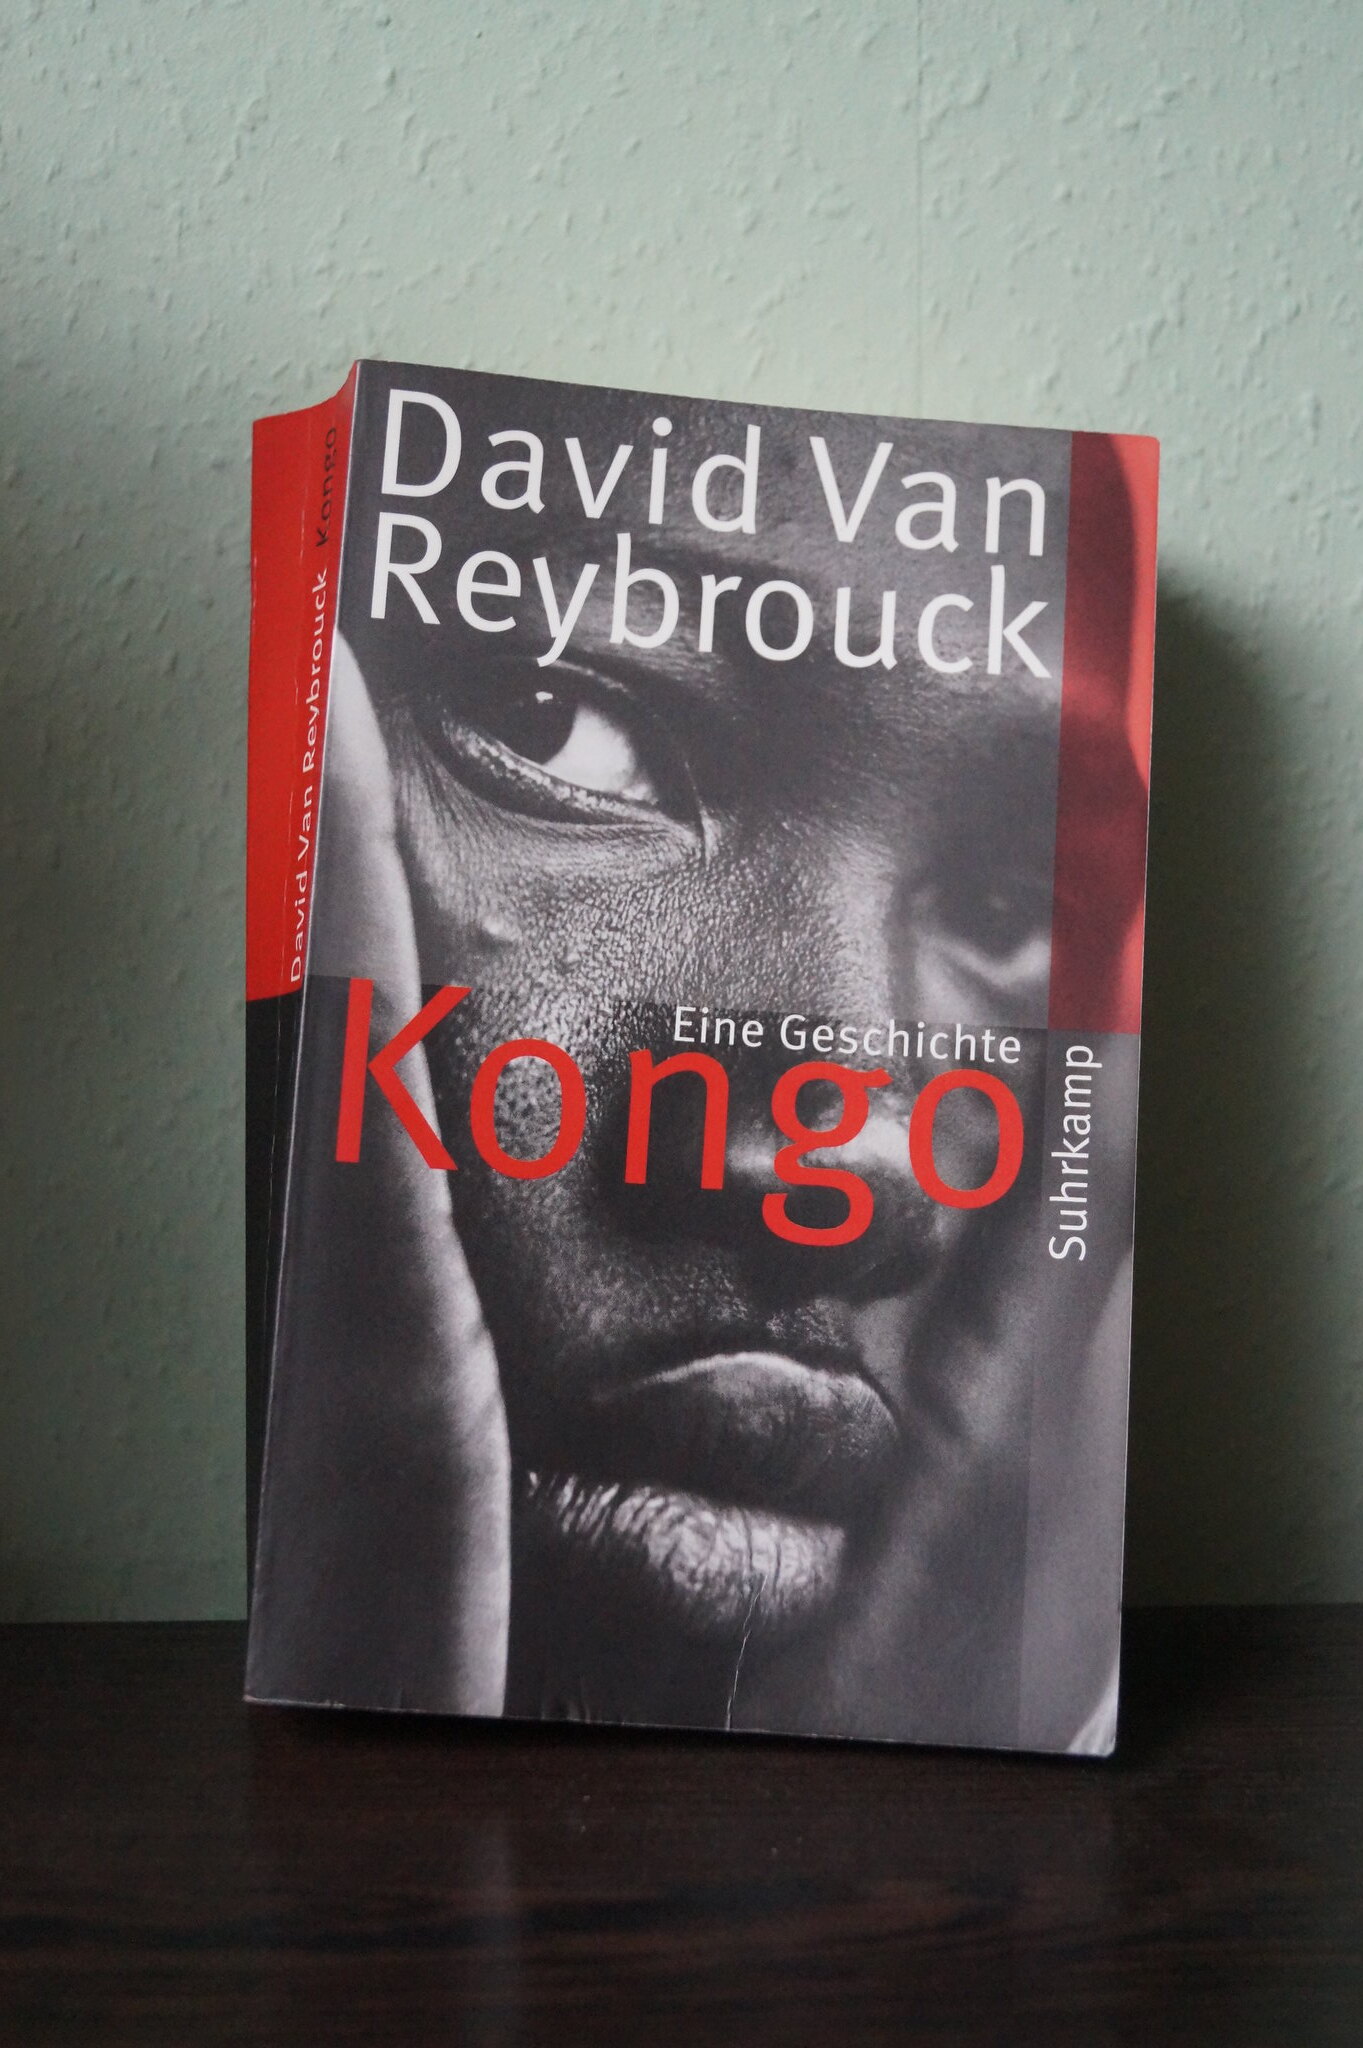 Congo: The Epic History of a People, by David van Reybrouck